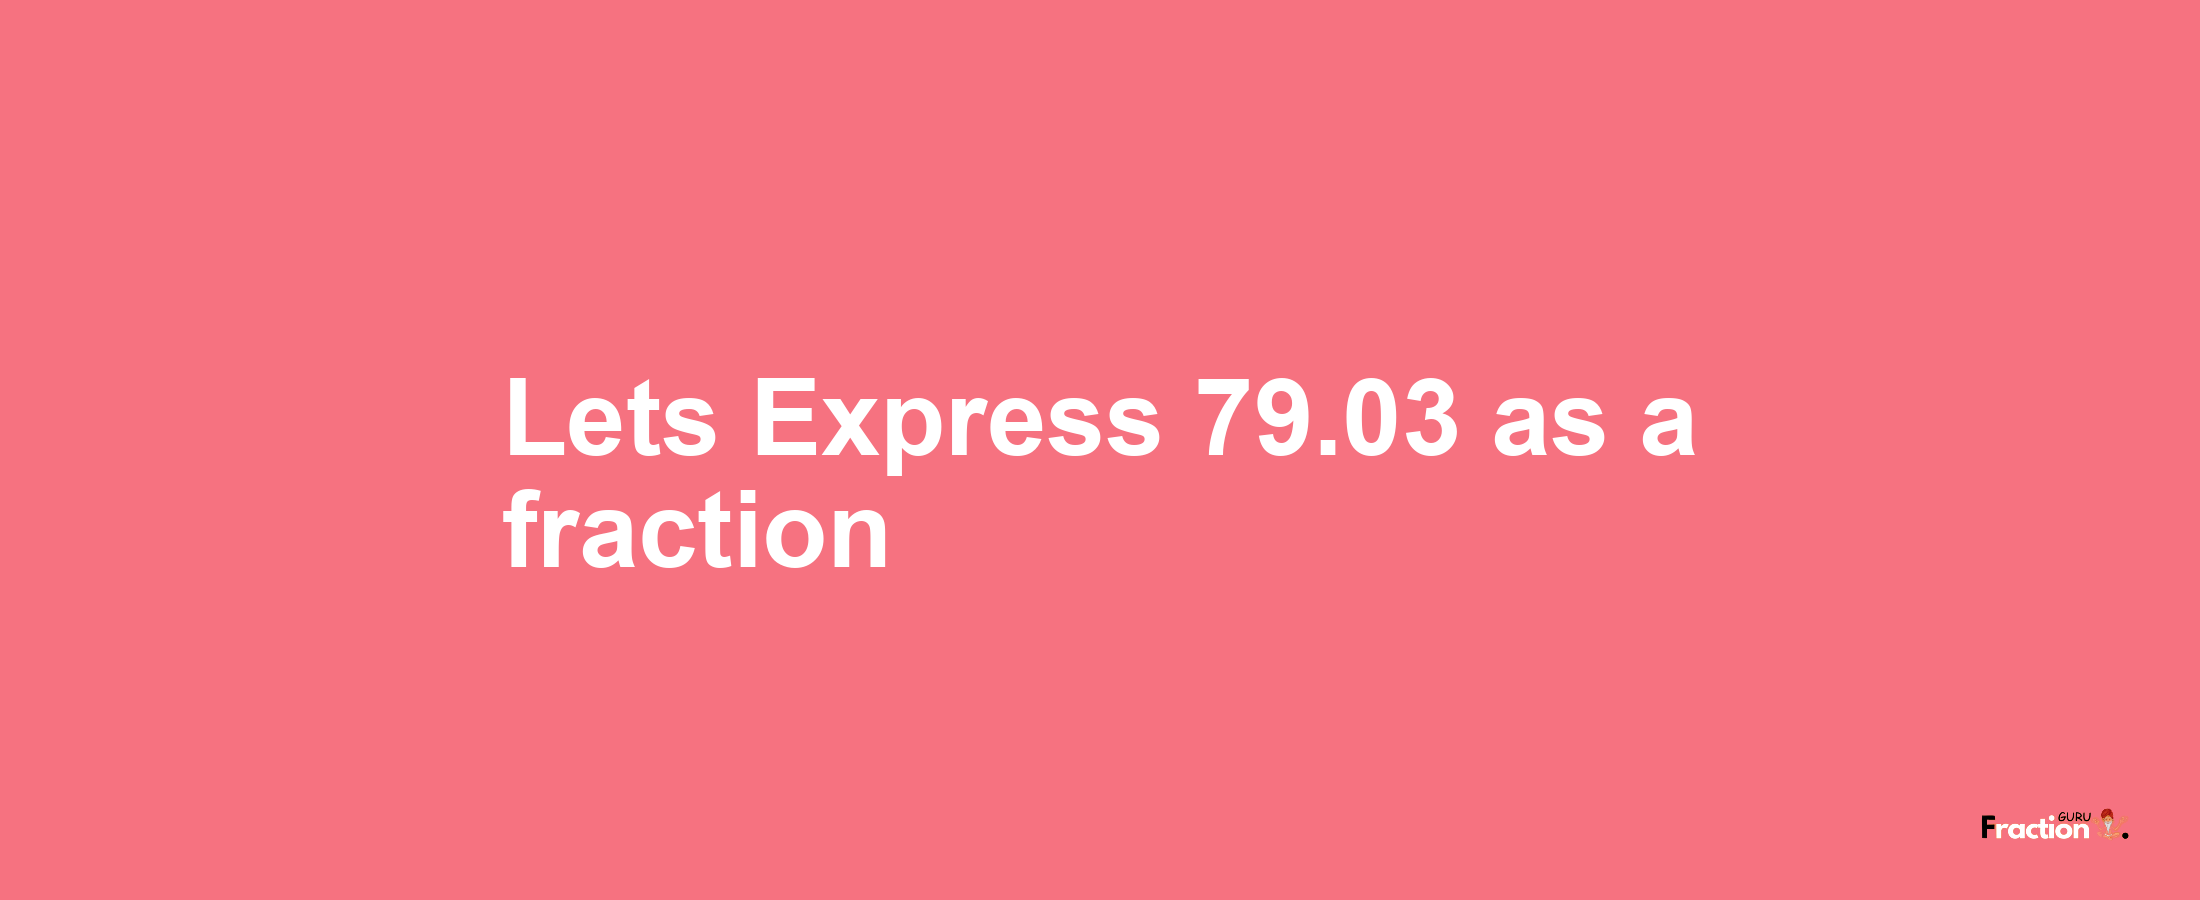 Lets Express 79.03 as afraction